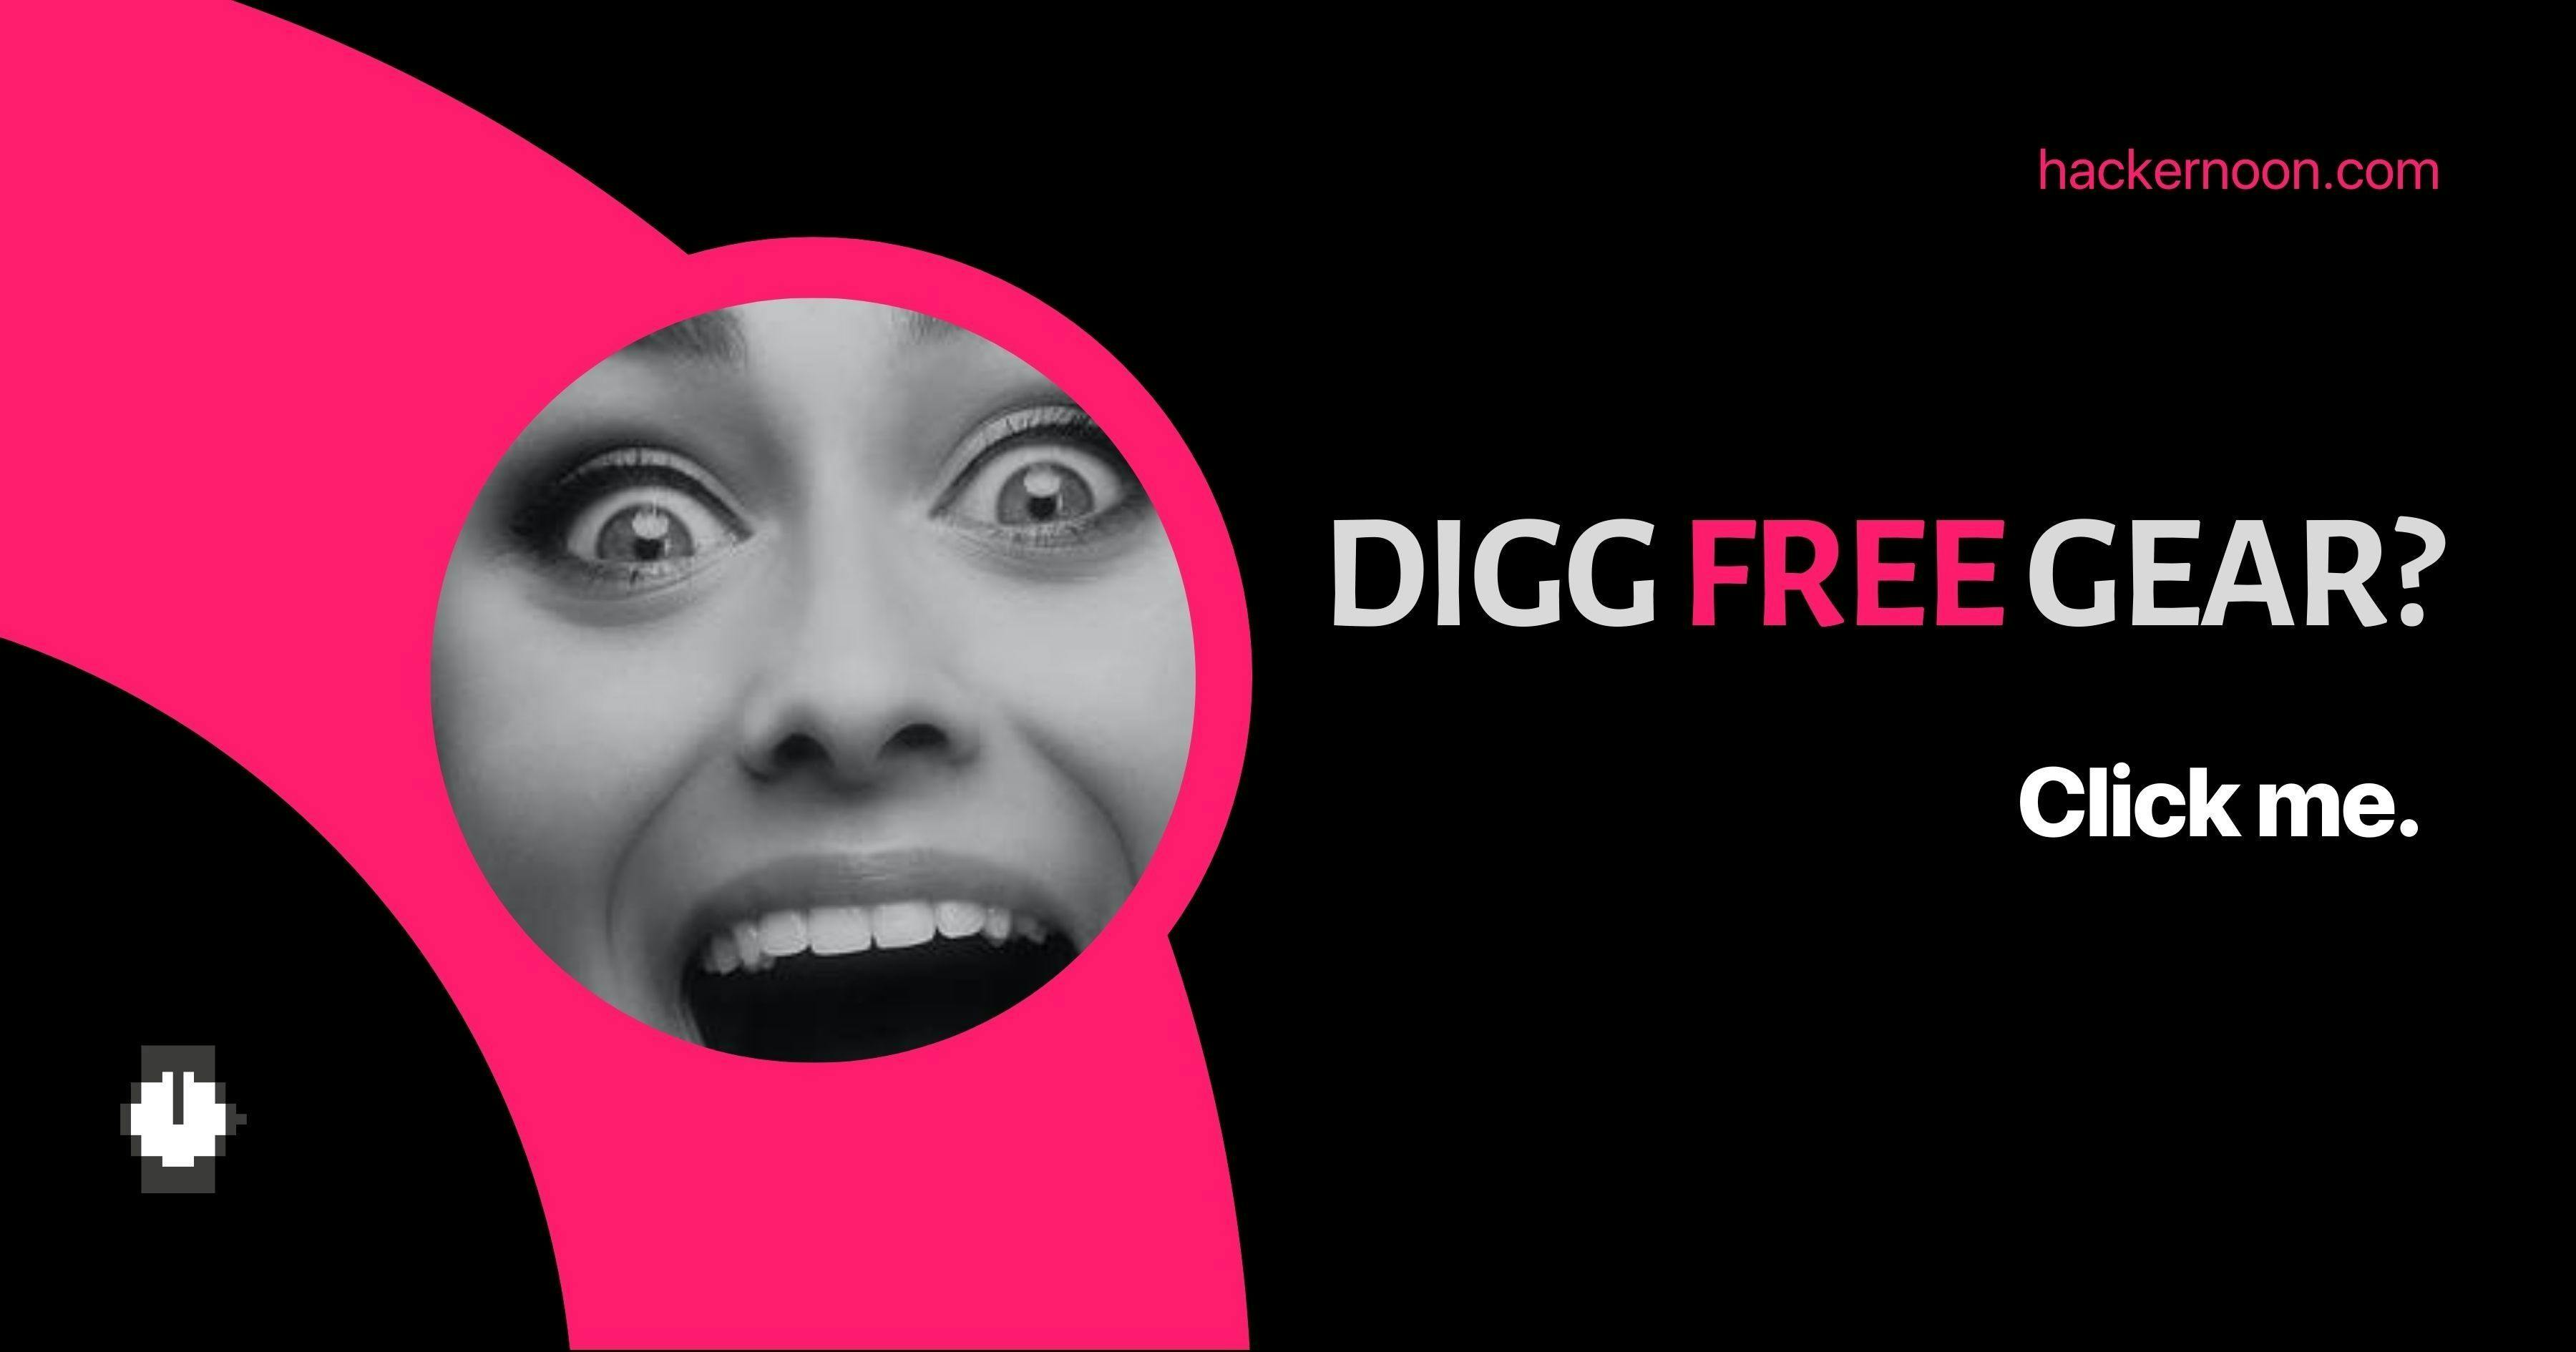 featured image - Digg Free Gear? – A Thank You Contest by HackerNoon